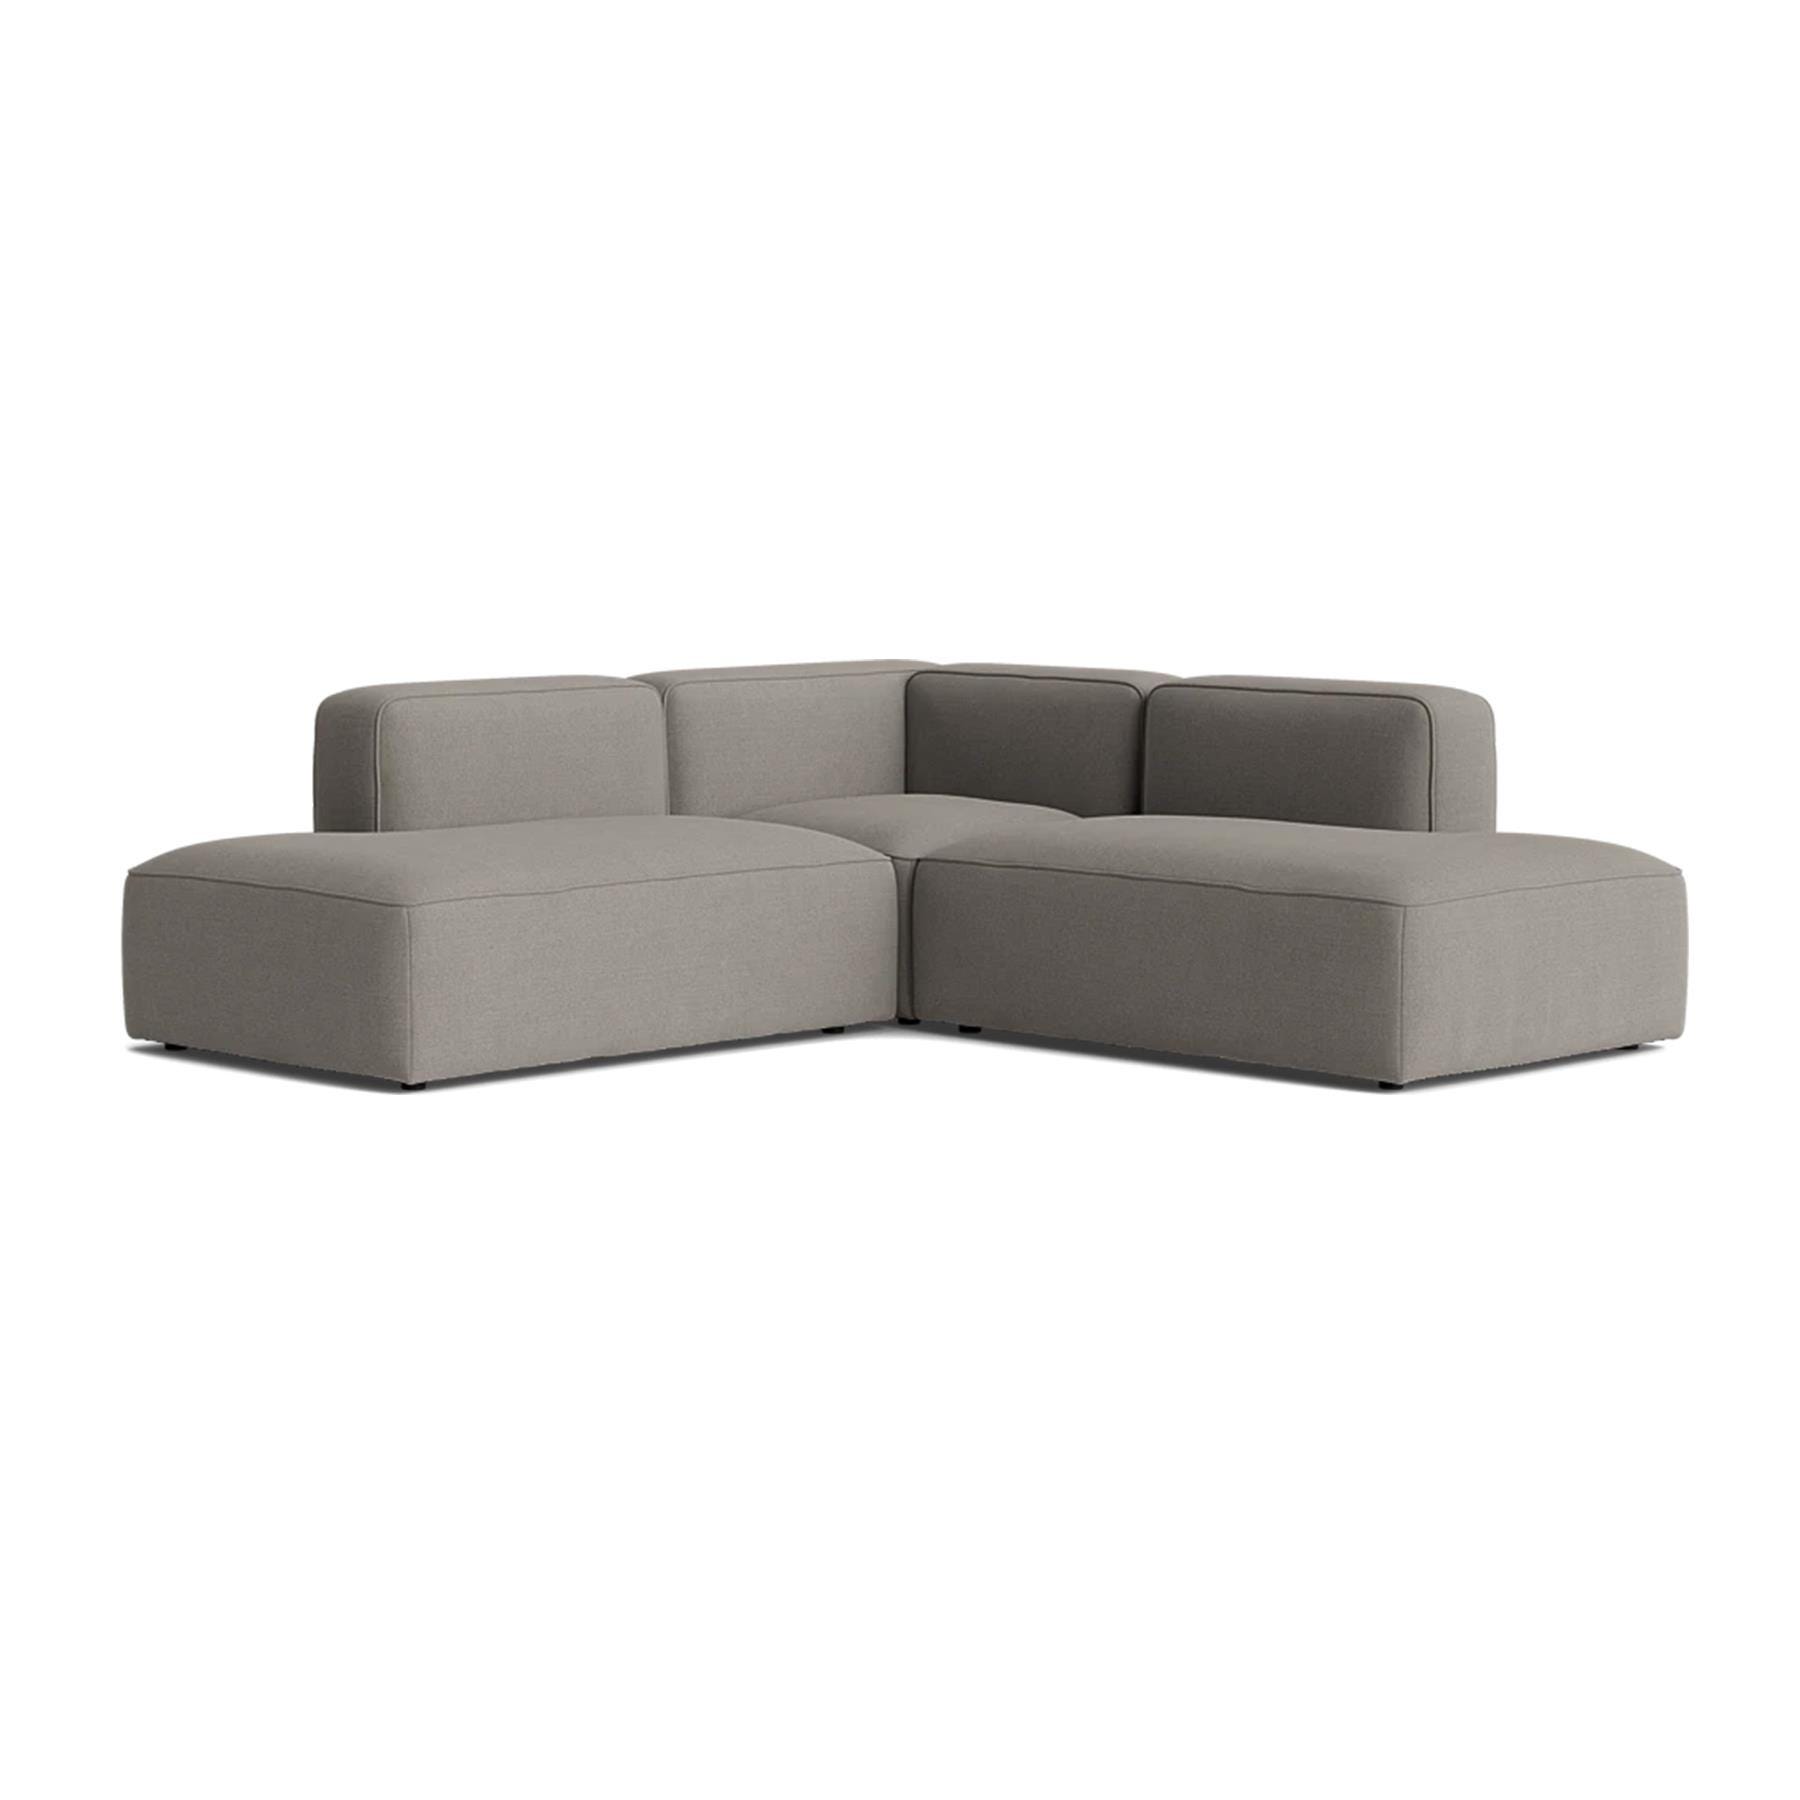 Make Nordic Basecamp Corner Sofa With Open Ends Fiord 262 Brown Designer Furniture From Holloways Of Ludlow